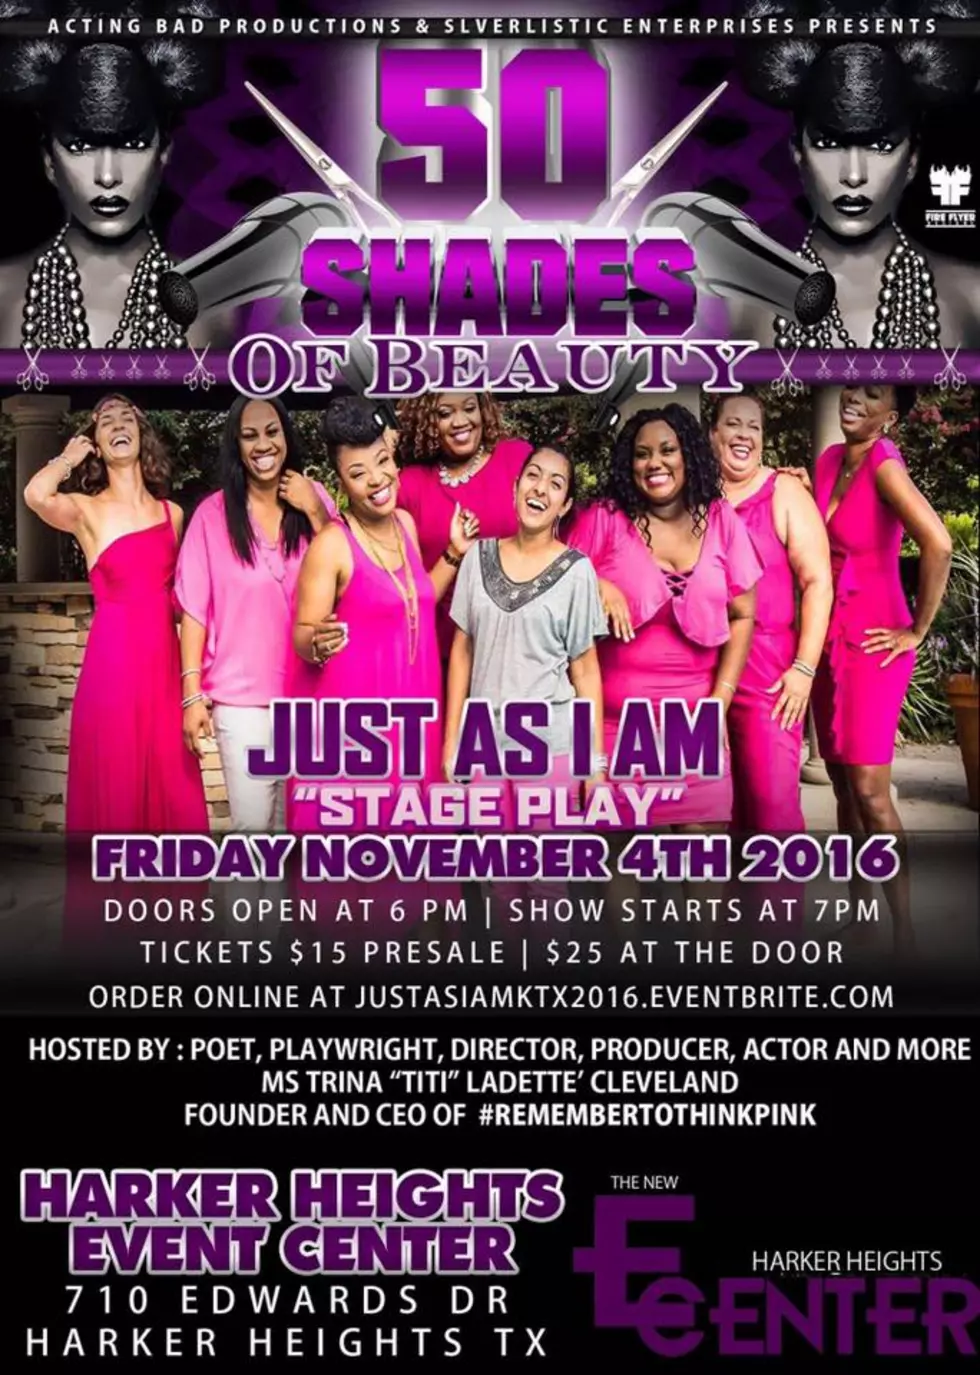 We’ve Got Tickets To The Stage Play “Just As I Am”